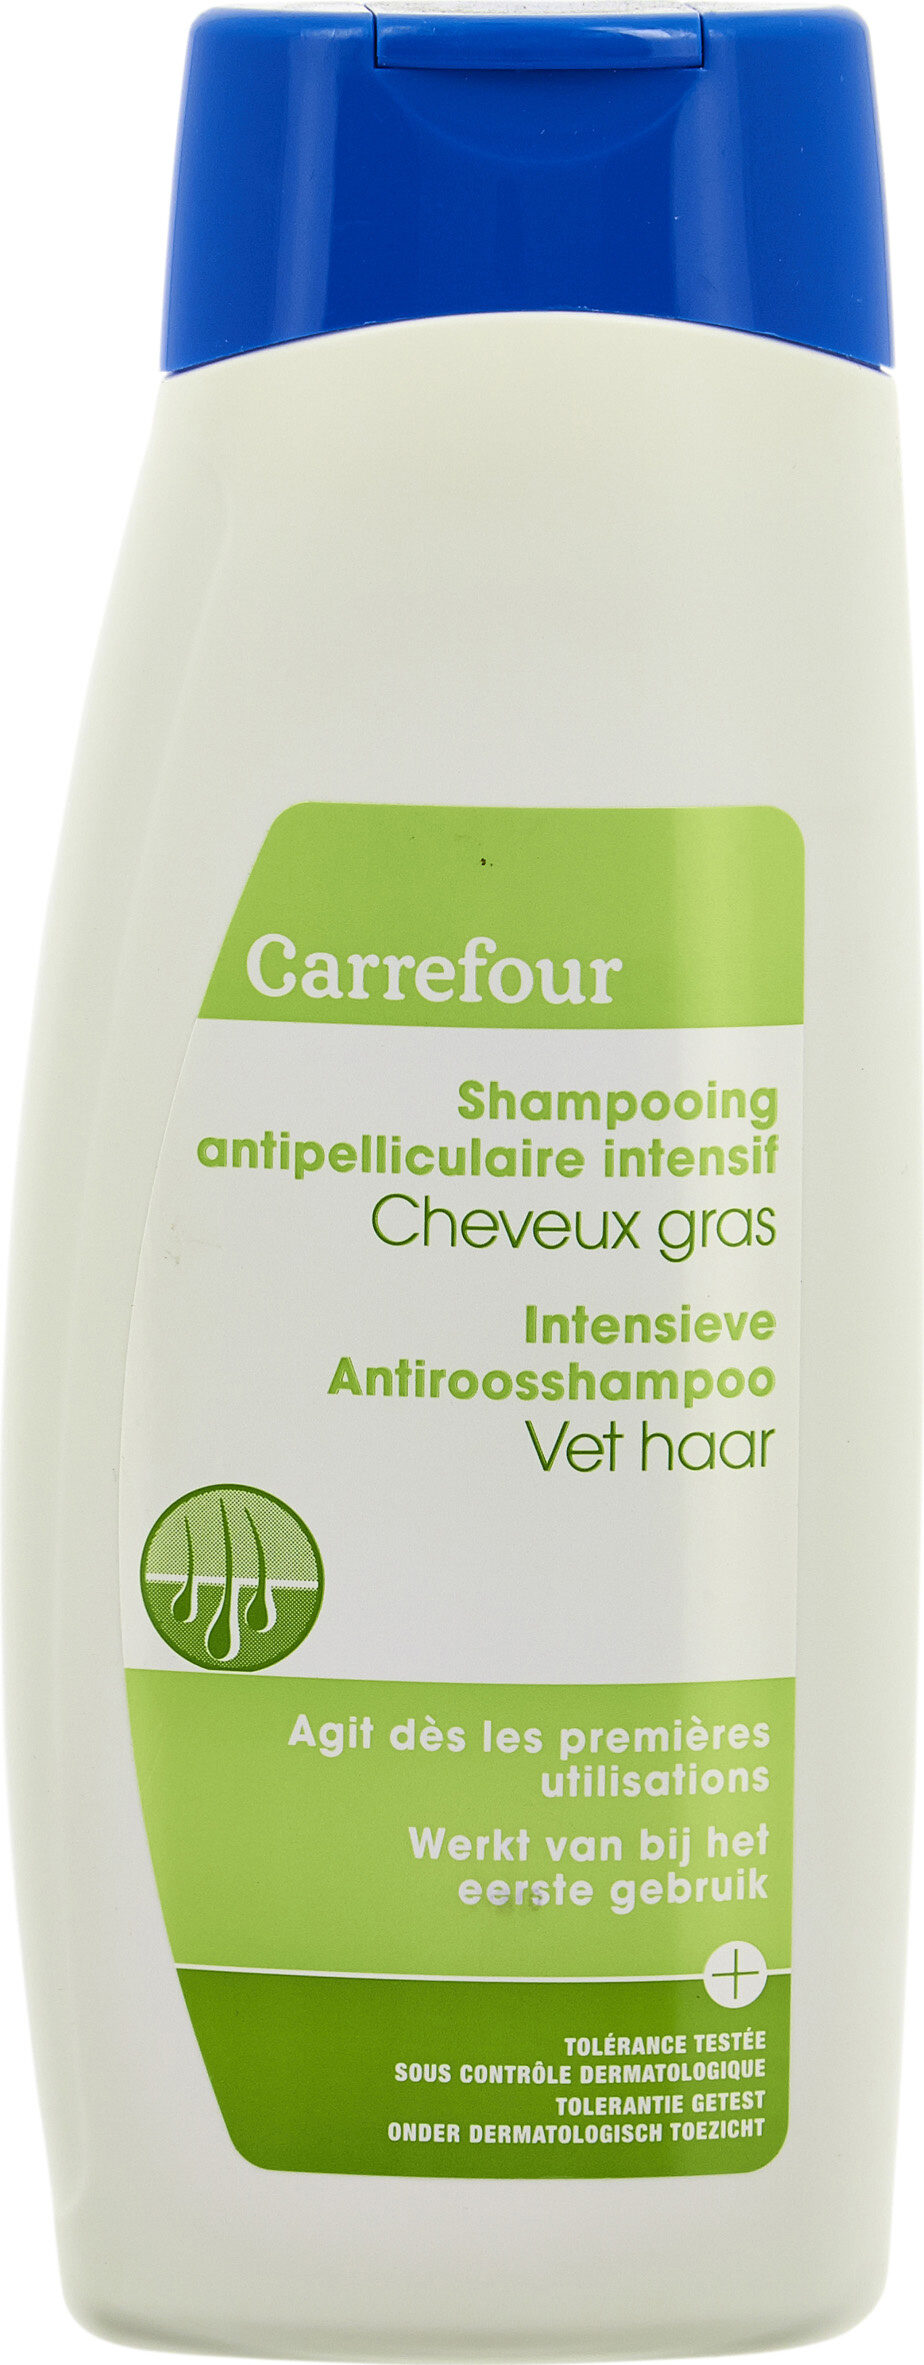 Shampooing antipelliculaire intensif Cheveux gras - Product - fr